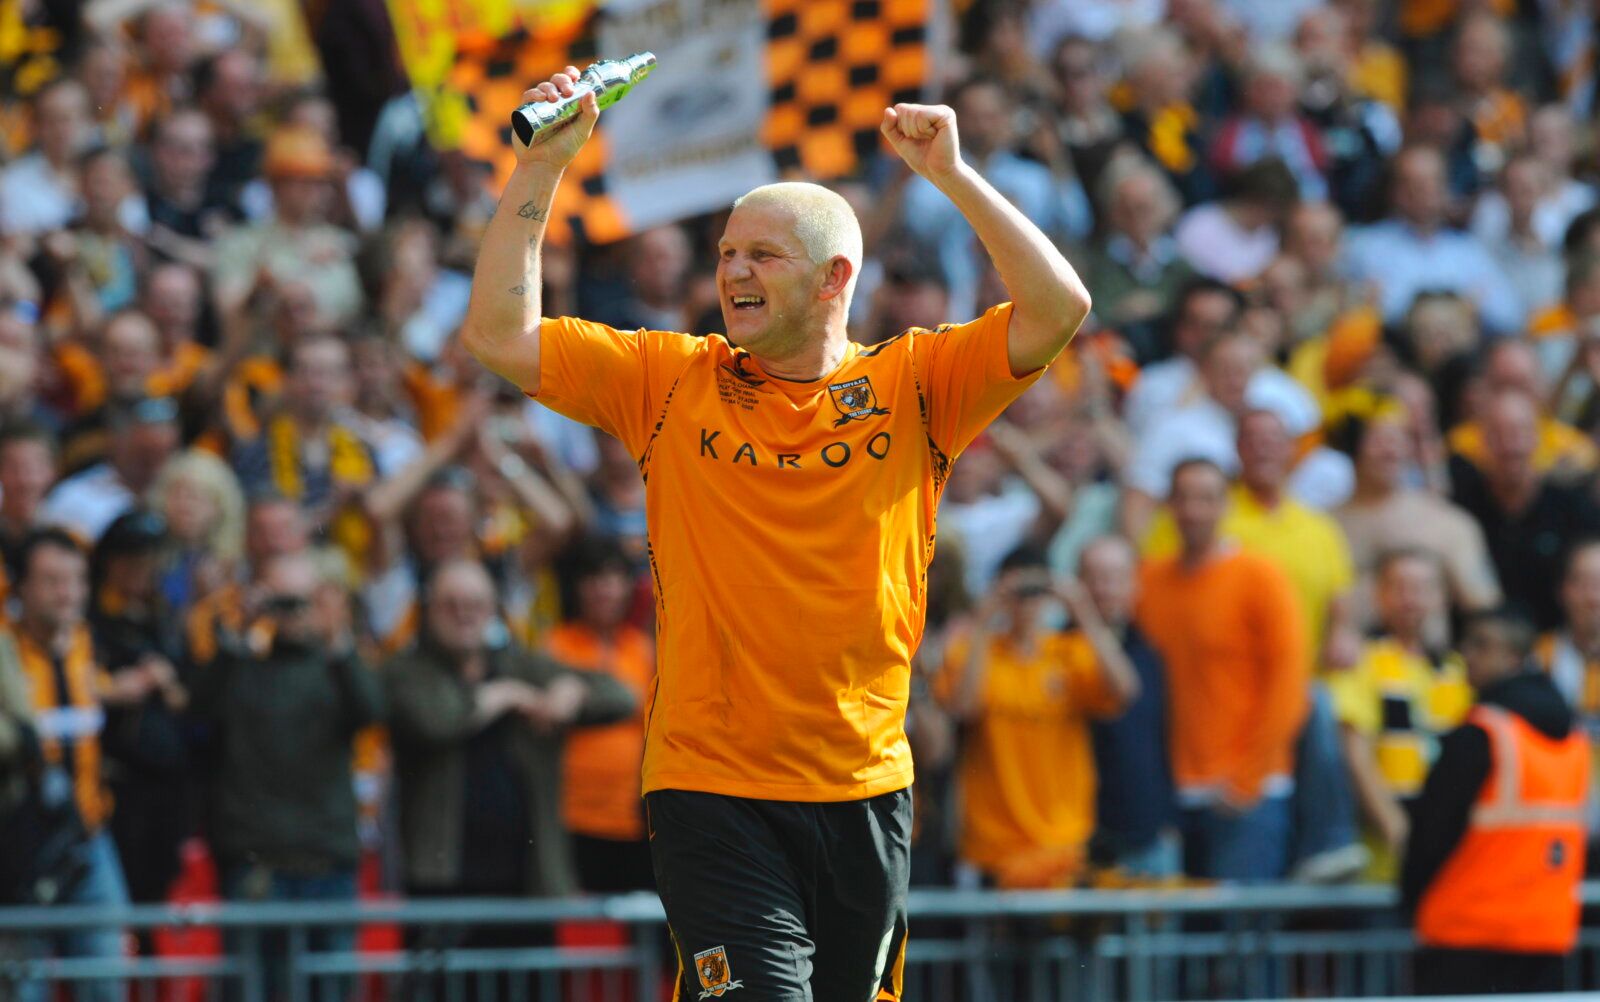 Football - Bristol City v Hull City Coca-Cola Football League Championship Play-Off Final - Wembley Stadium - 07/08 - 24/5/08 
Dean Windass of Hull City celebrates at the end of the game  
Mandatory Credit: Action Images / Henry Browne